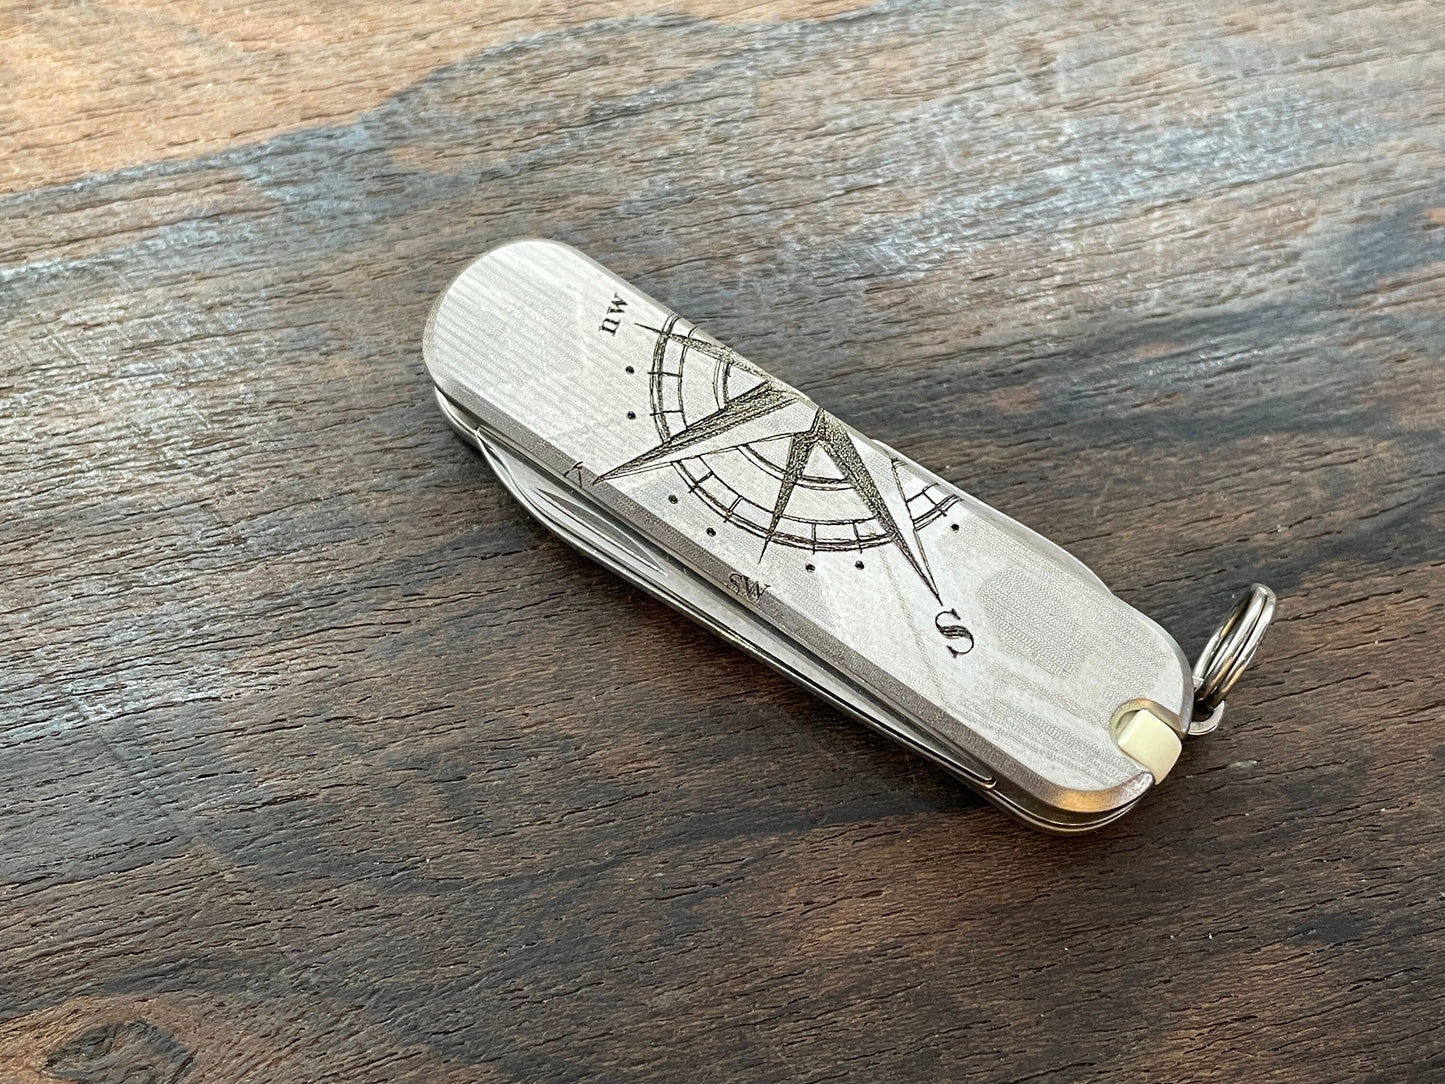 COMPASS engraved 58mm Titanium Scales for Swiss Army SAK